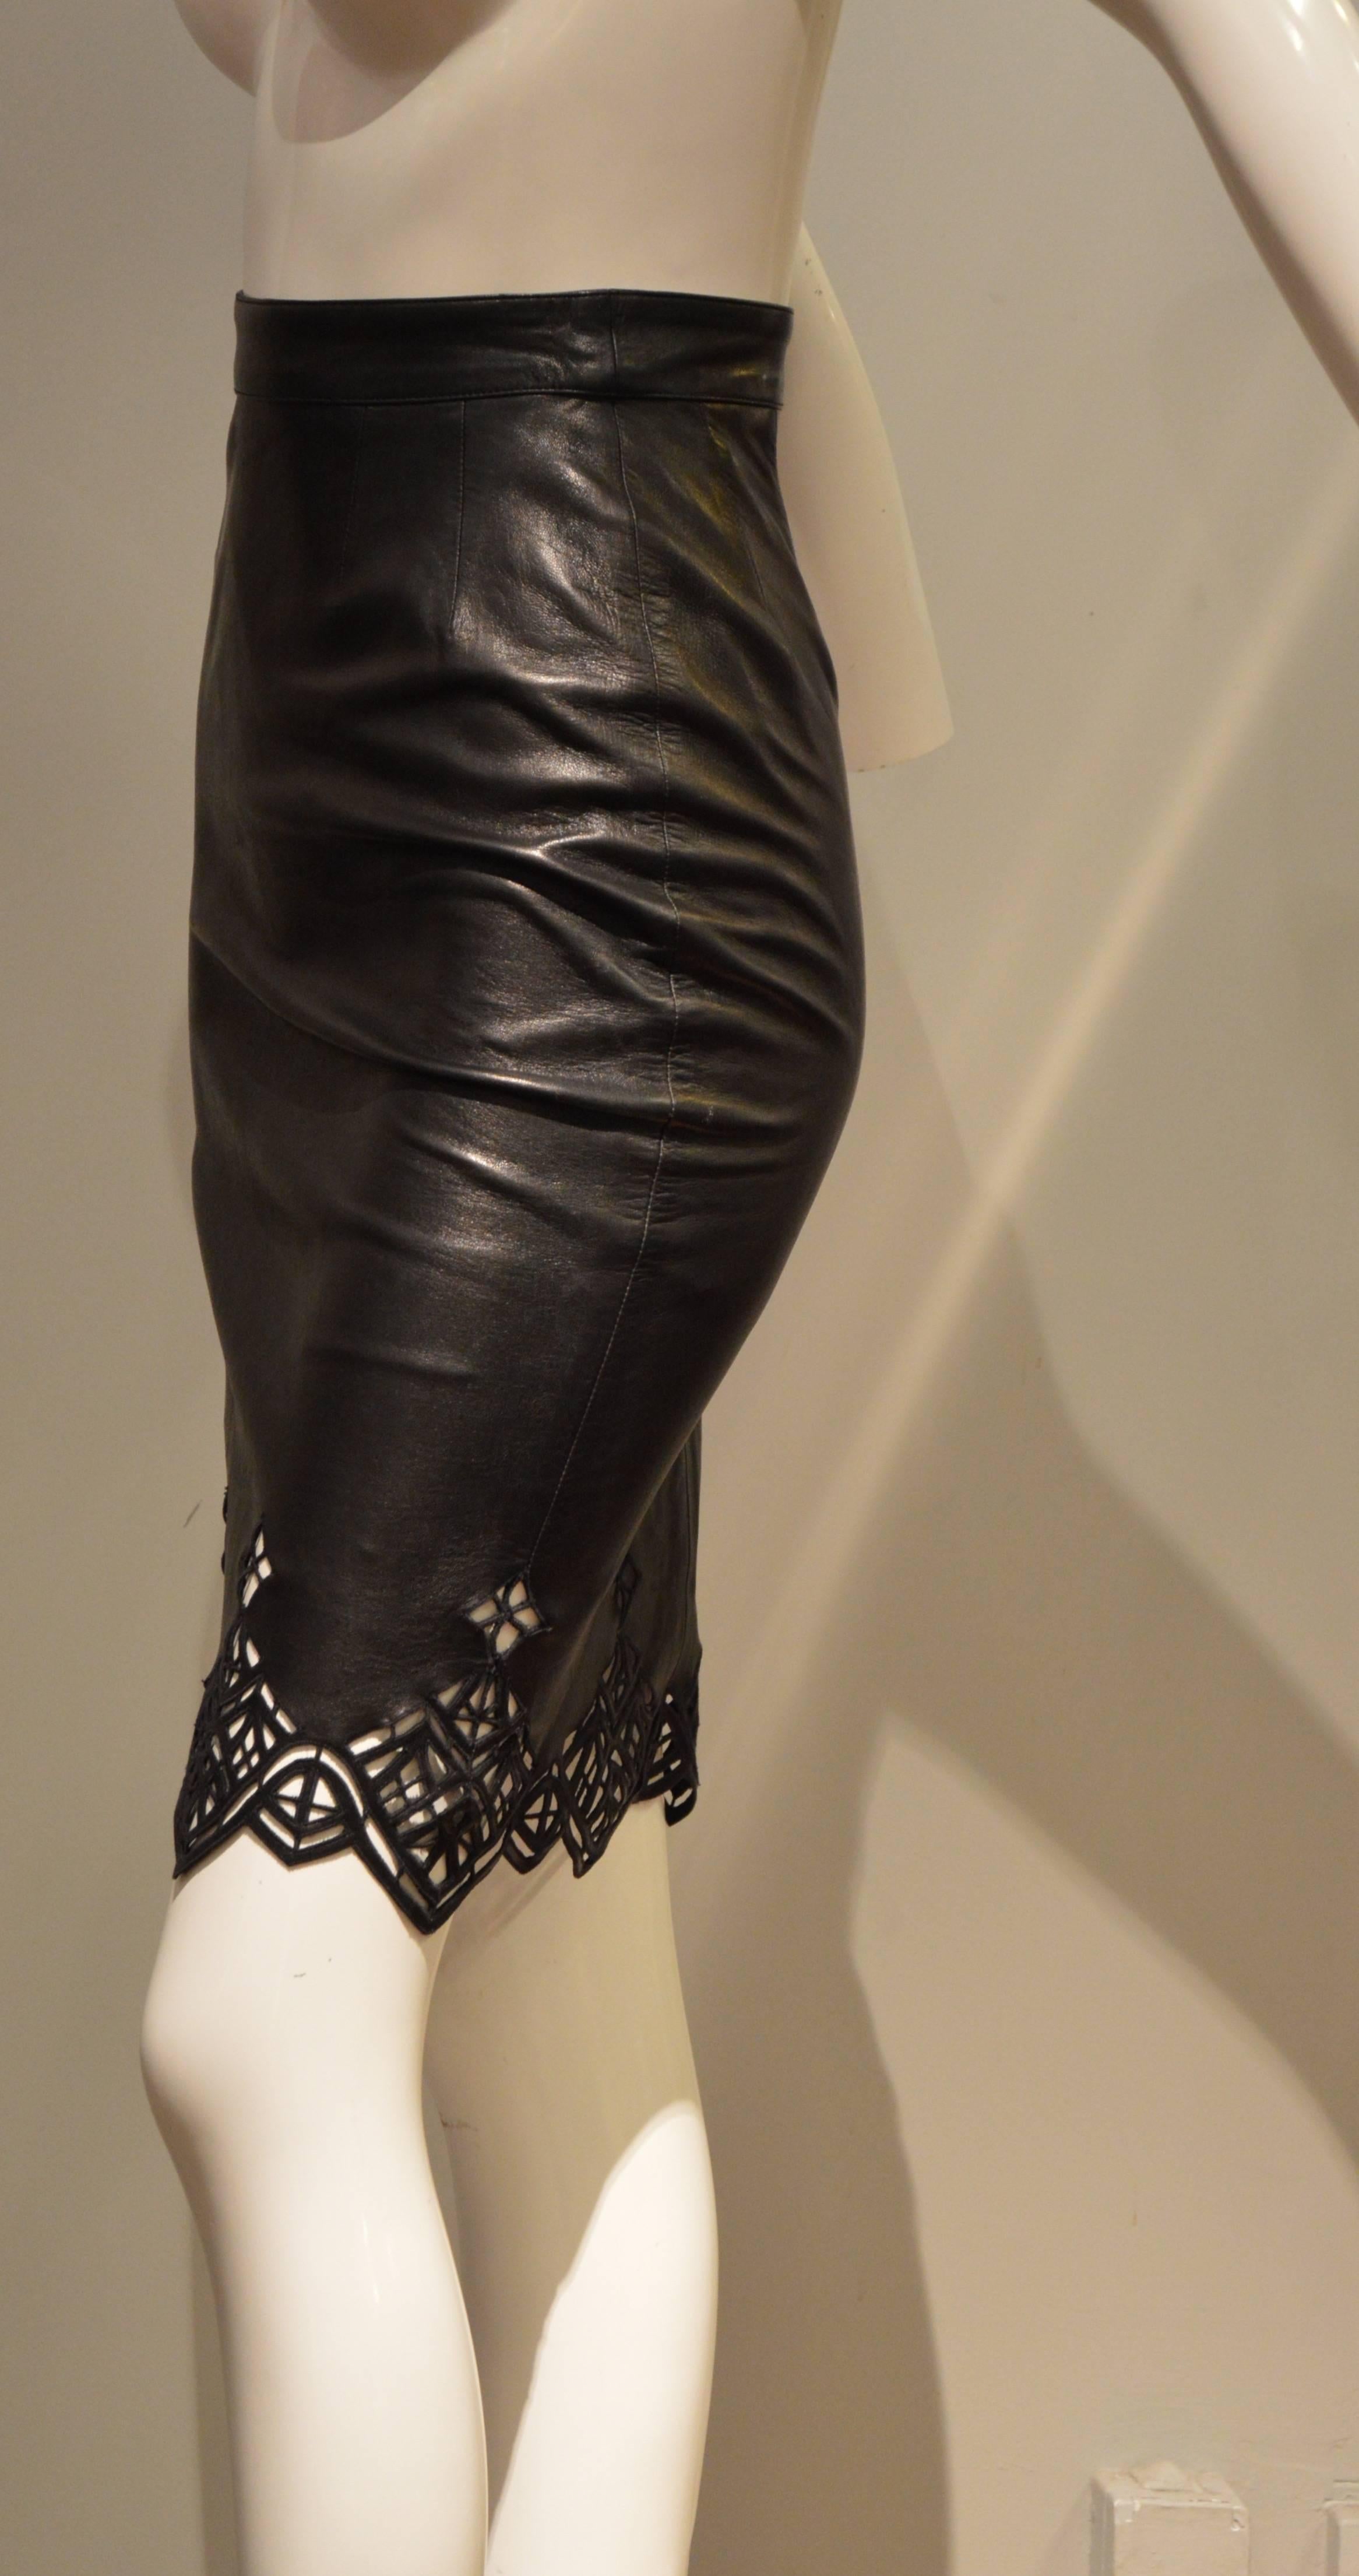 This Nina Ricci Haute Boutique pencil leather skirt is a dream. The leather souple but strong, deep black with edgy cut outs at the bottom redefines luxury with delicacy. You will find with the haute boutique Nina Ricci tag a "Atelier